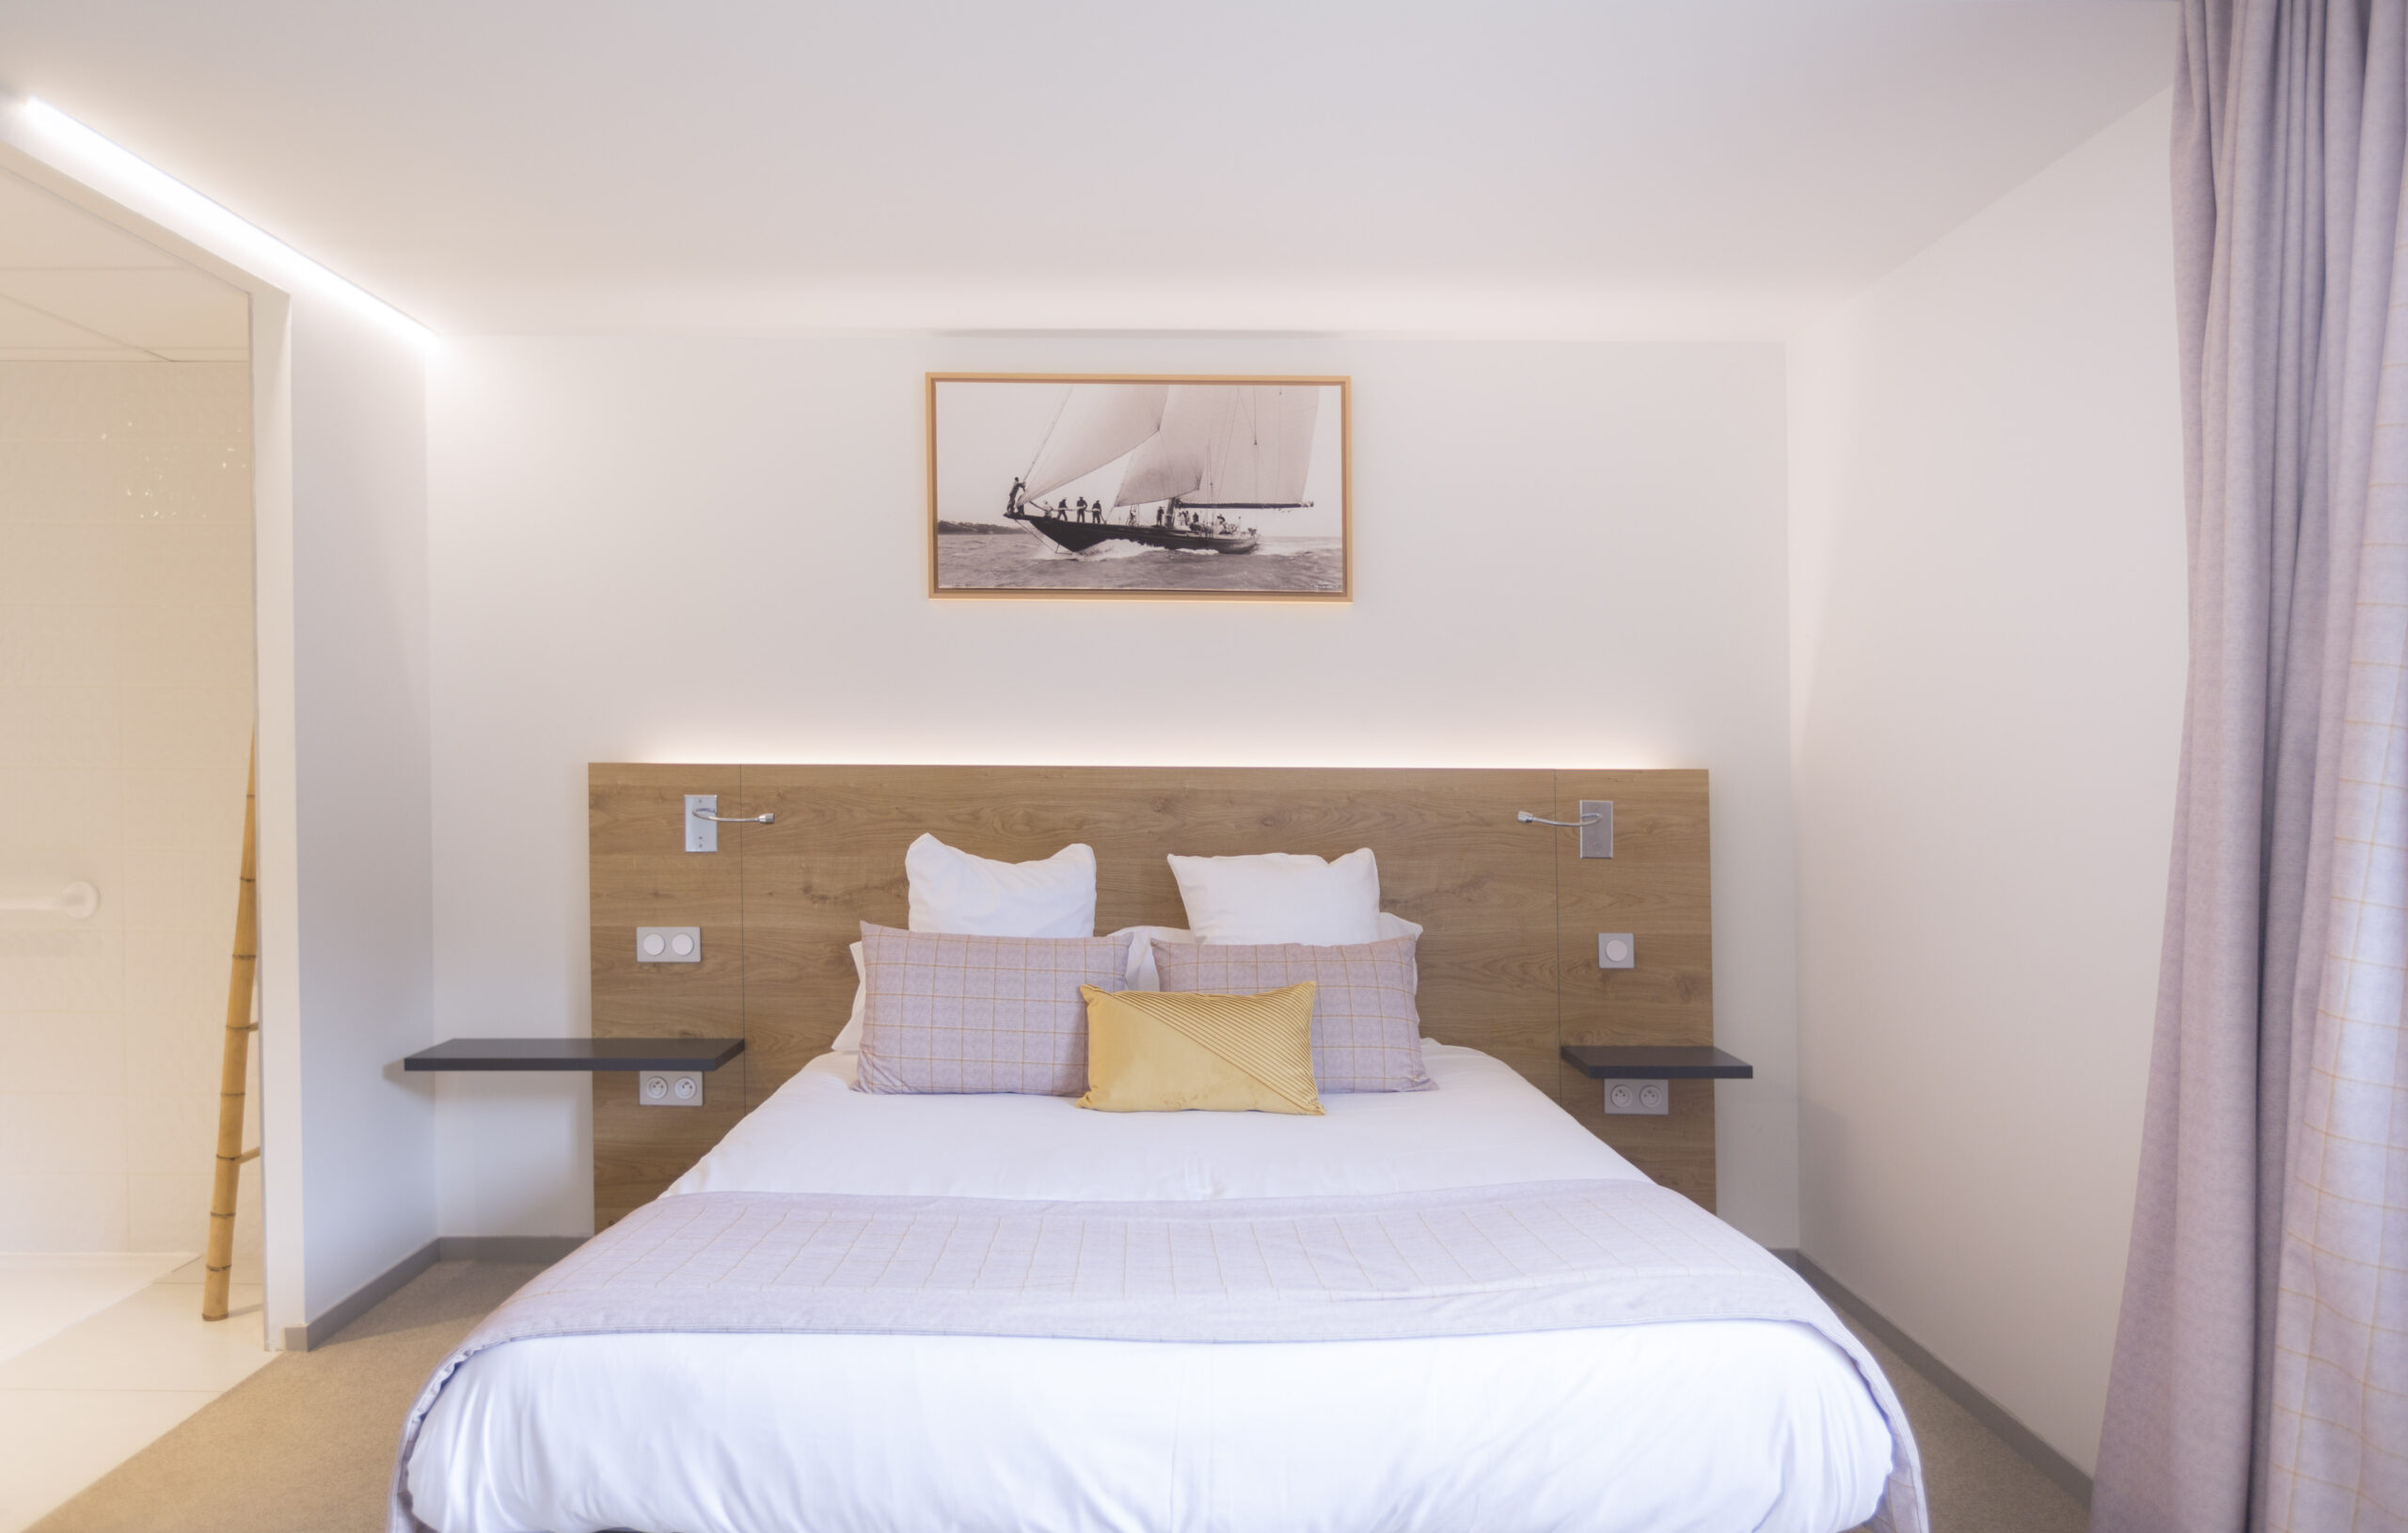 The standard room of the Nautica Hotel in Perros-Guirec